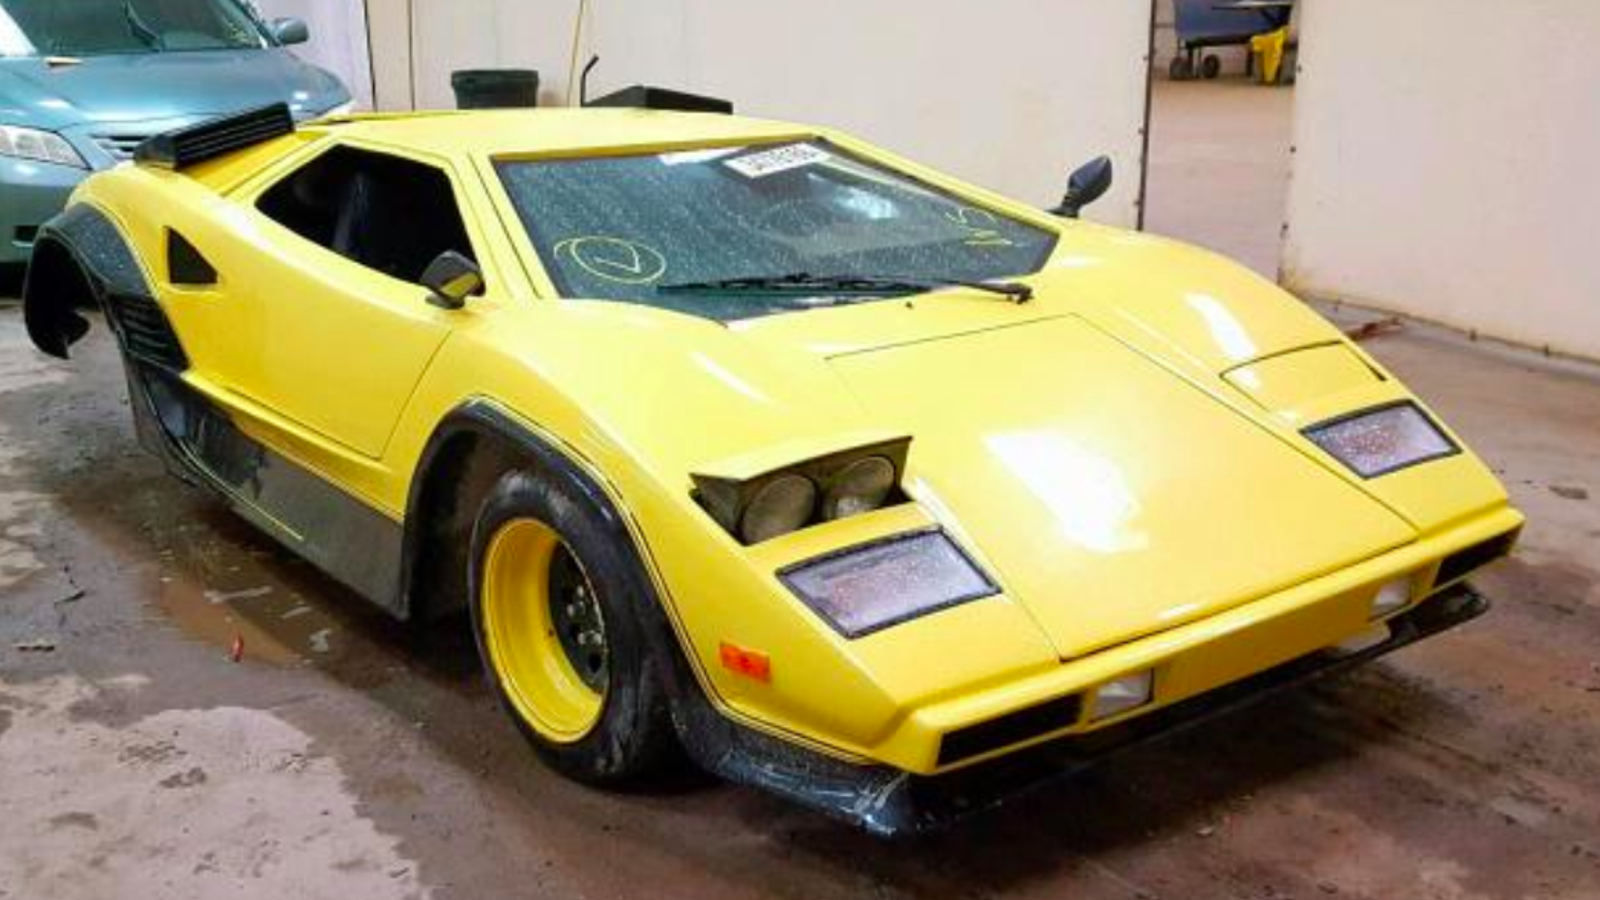 You Can Buy the Lamborghini Countach of Your Dreams for Dirt Cheap
Except Its a Fiero